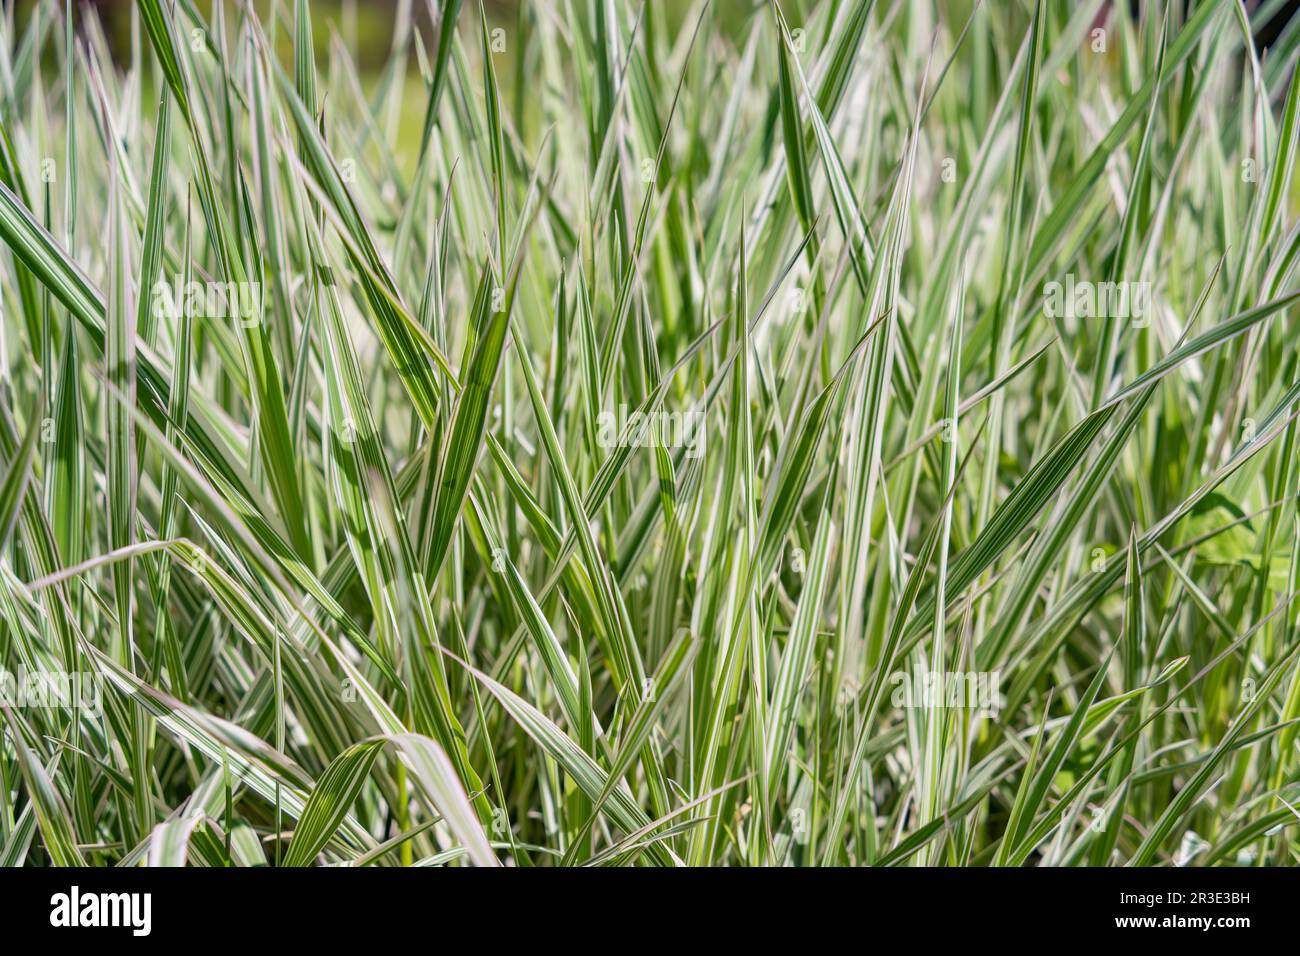 Close up detail with Festuca glauca, commonly known as blue fescue grass plant. Stock Photo